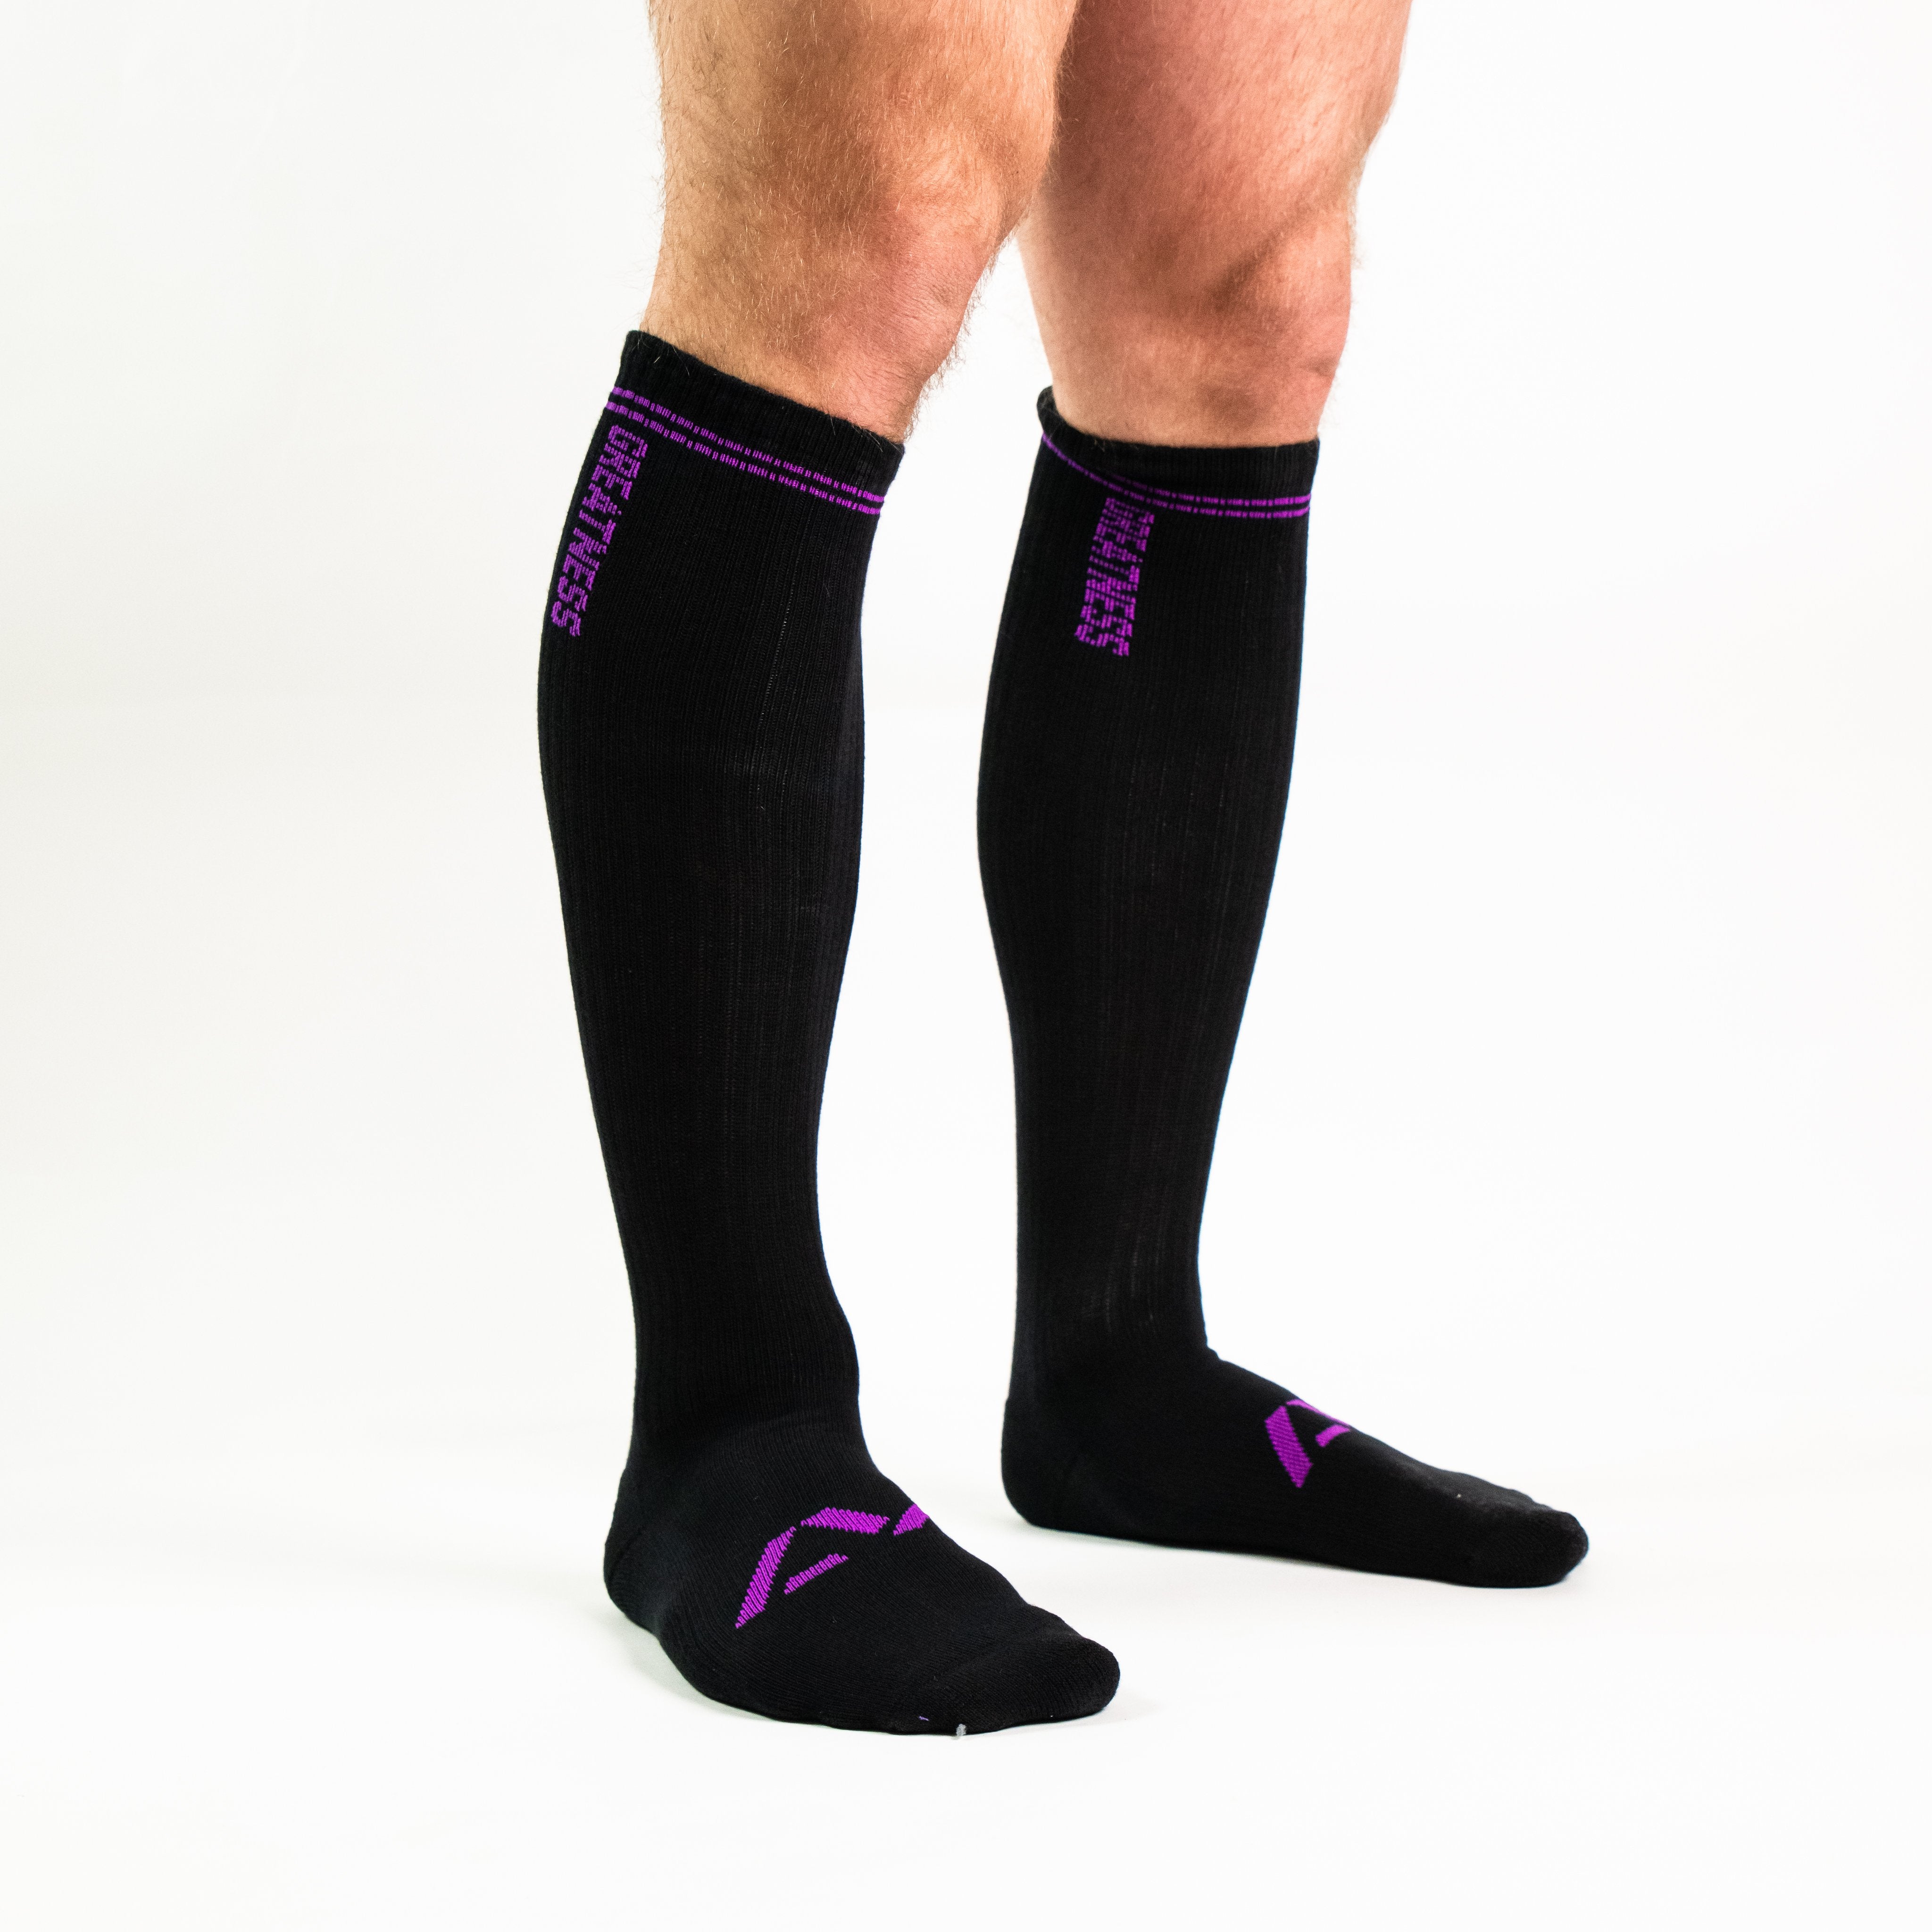 Standout from the crowd in our Purple Deadlift socks and let your energy show on the platform, in your training or while out and about.